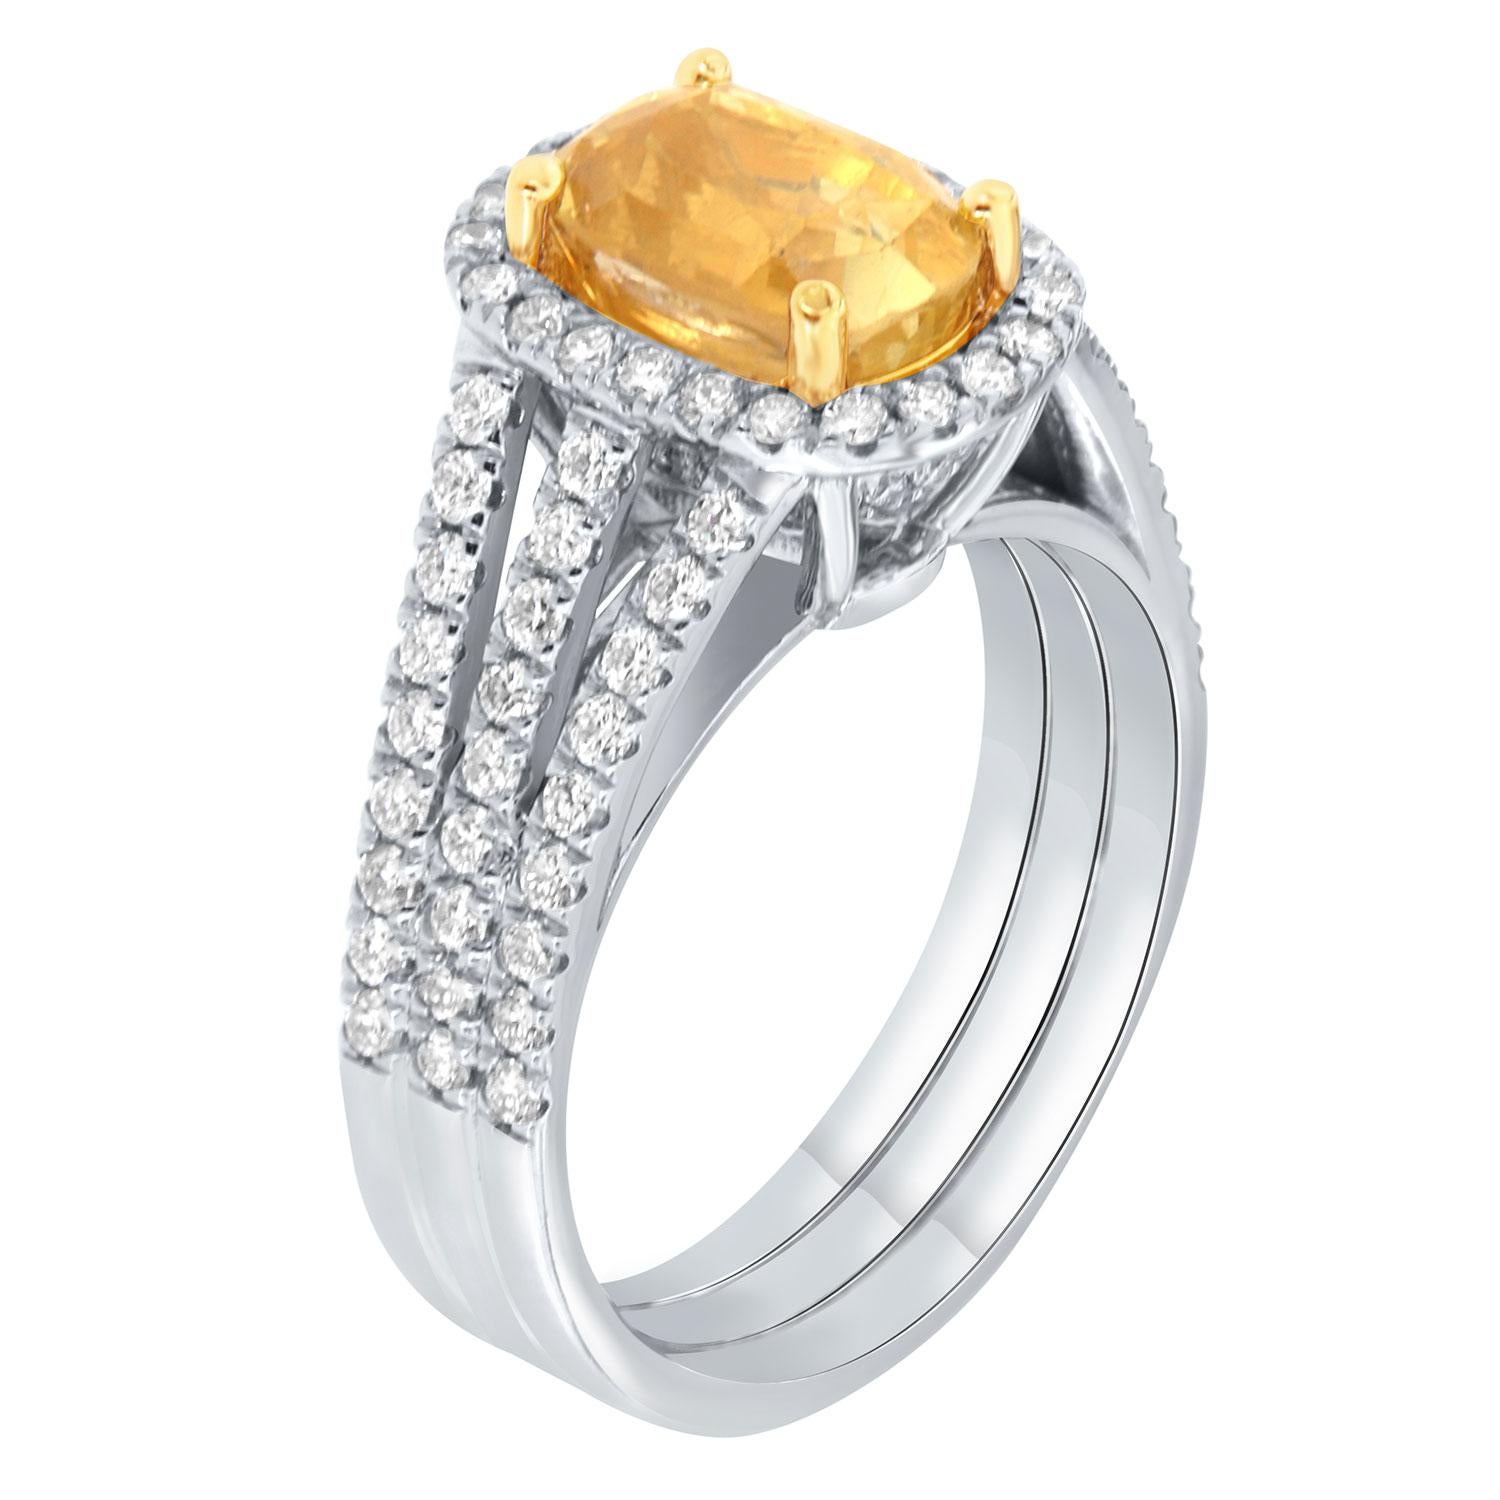 This handcrafted royalty ring in 18K White and Yellow Gold, featuring a one-of-a-kind  3.26 Carat GIA Certified Unheated Elongated Antique Cushion Natural Un-Heated Yellow Sapphire from Sri Lanka. It exhibits a vibrant yellow color similar to a